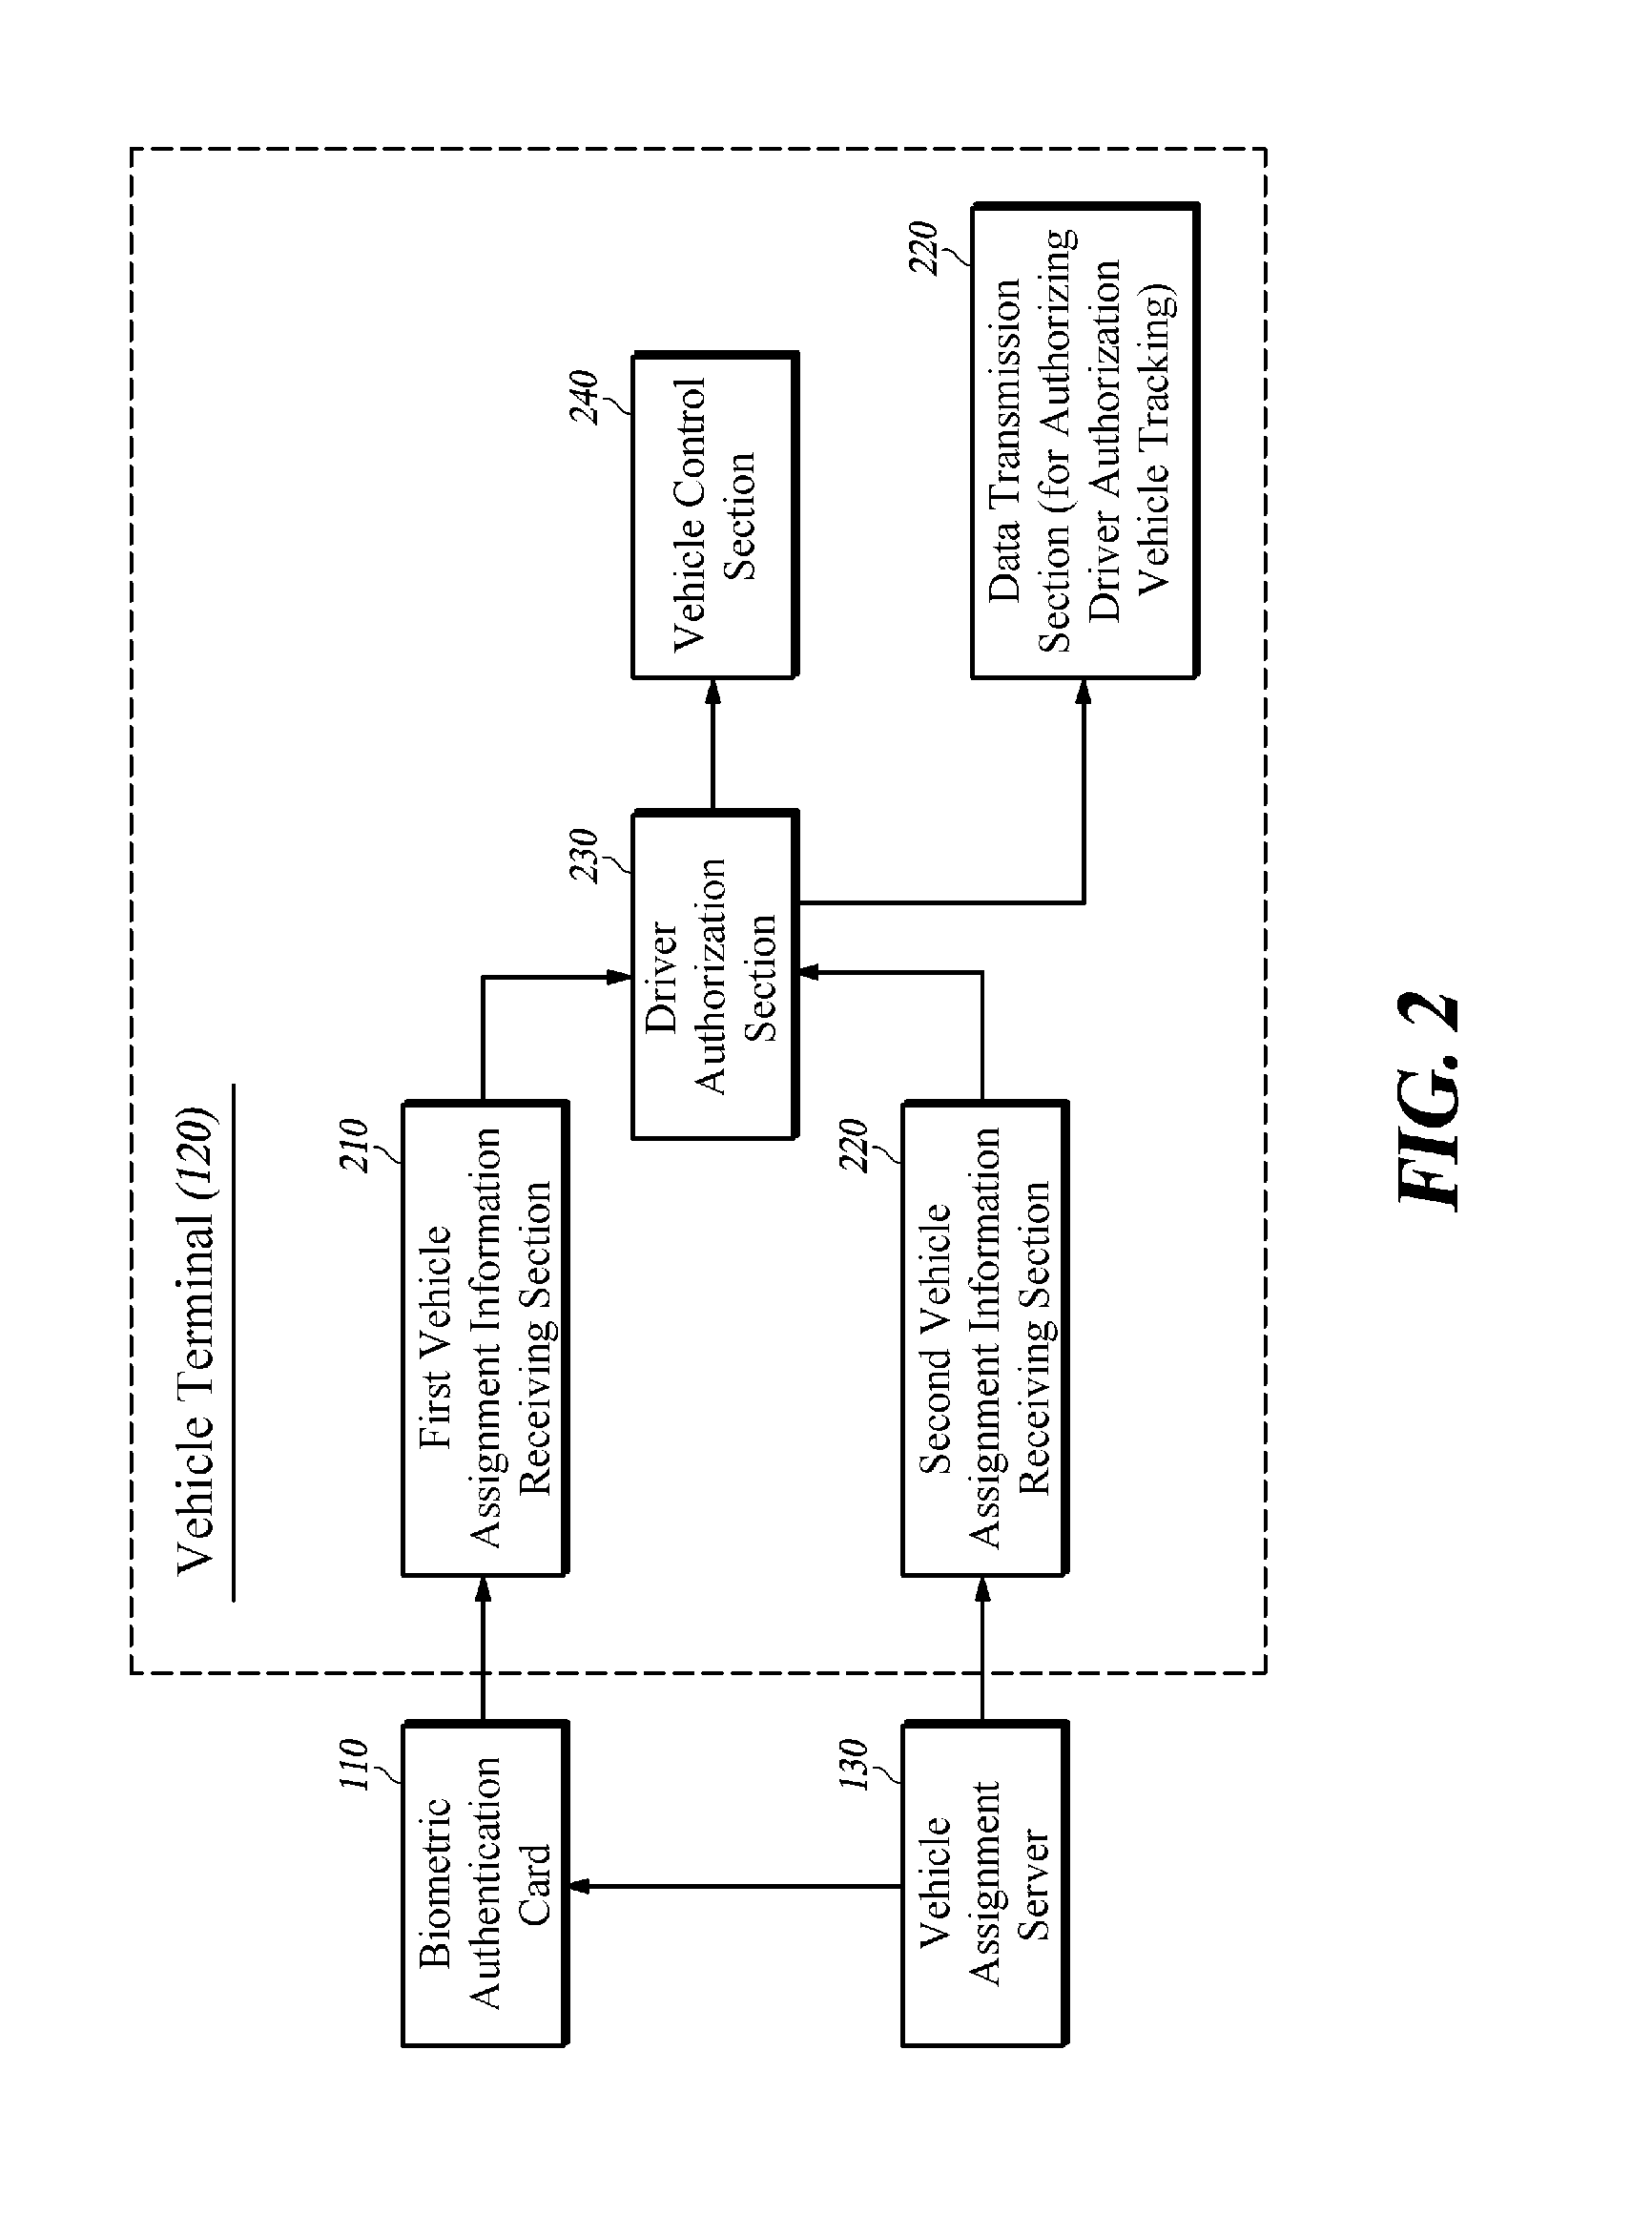 Method for controlling a vehicle using driver authentication, vehicle terminal, biometric identity card, biometric identification system, and method for providing a vehicle occupant protection and tracking function using the biometric identification card and the terminal